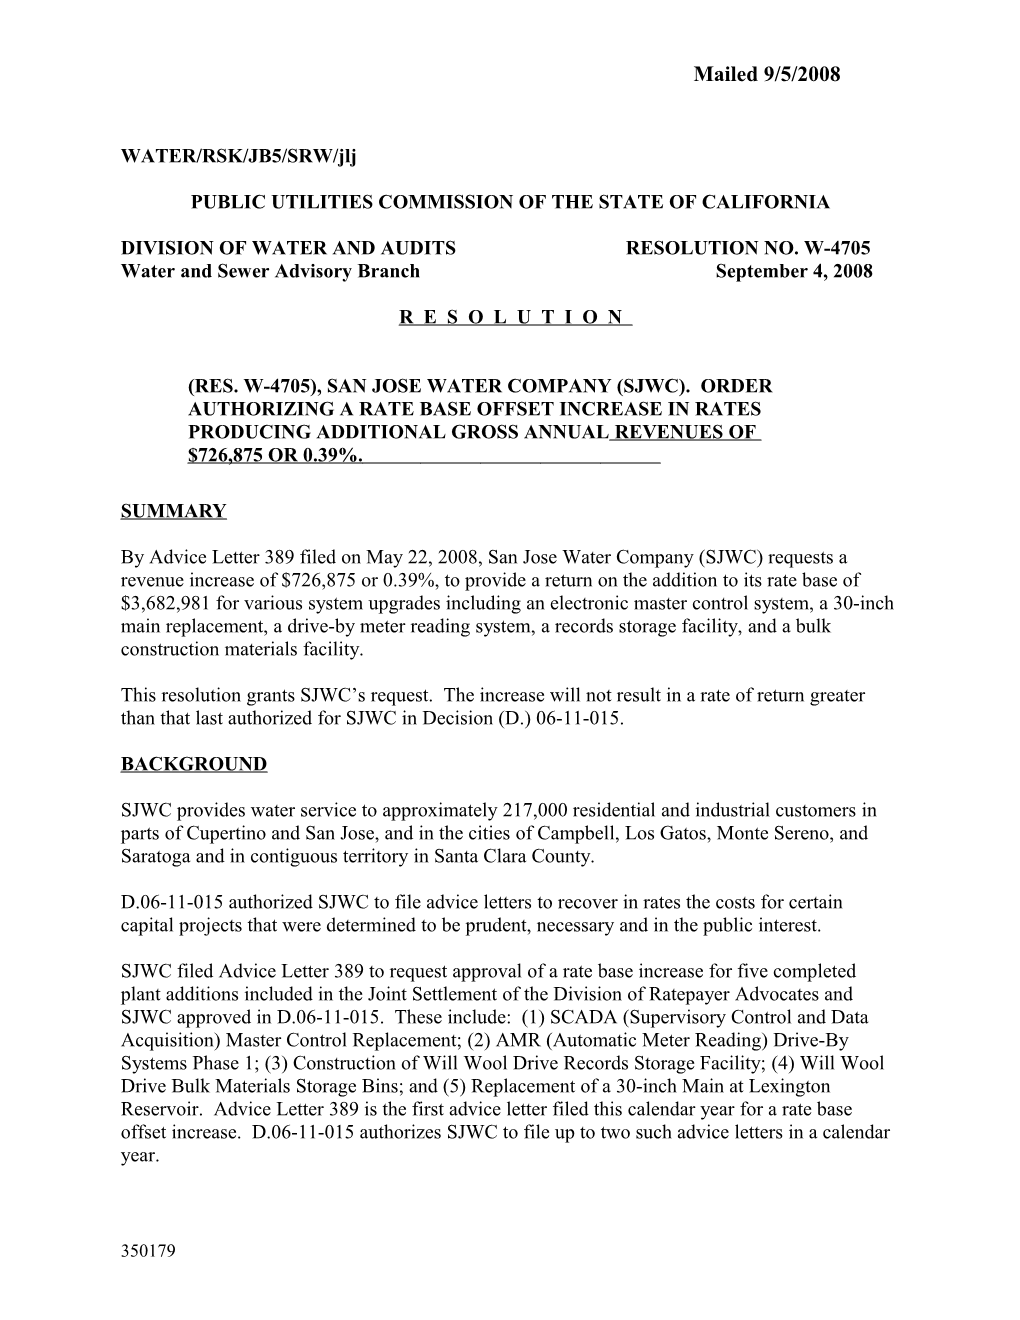 Public Utilities Commission of the State of California s13